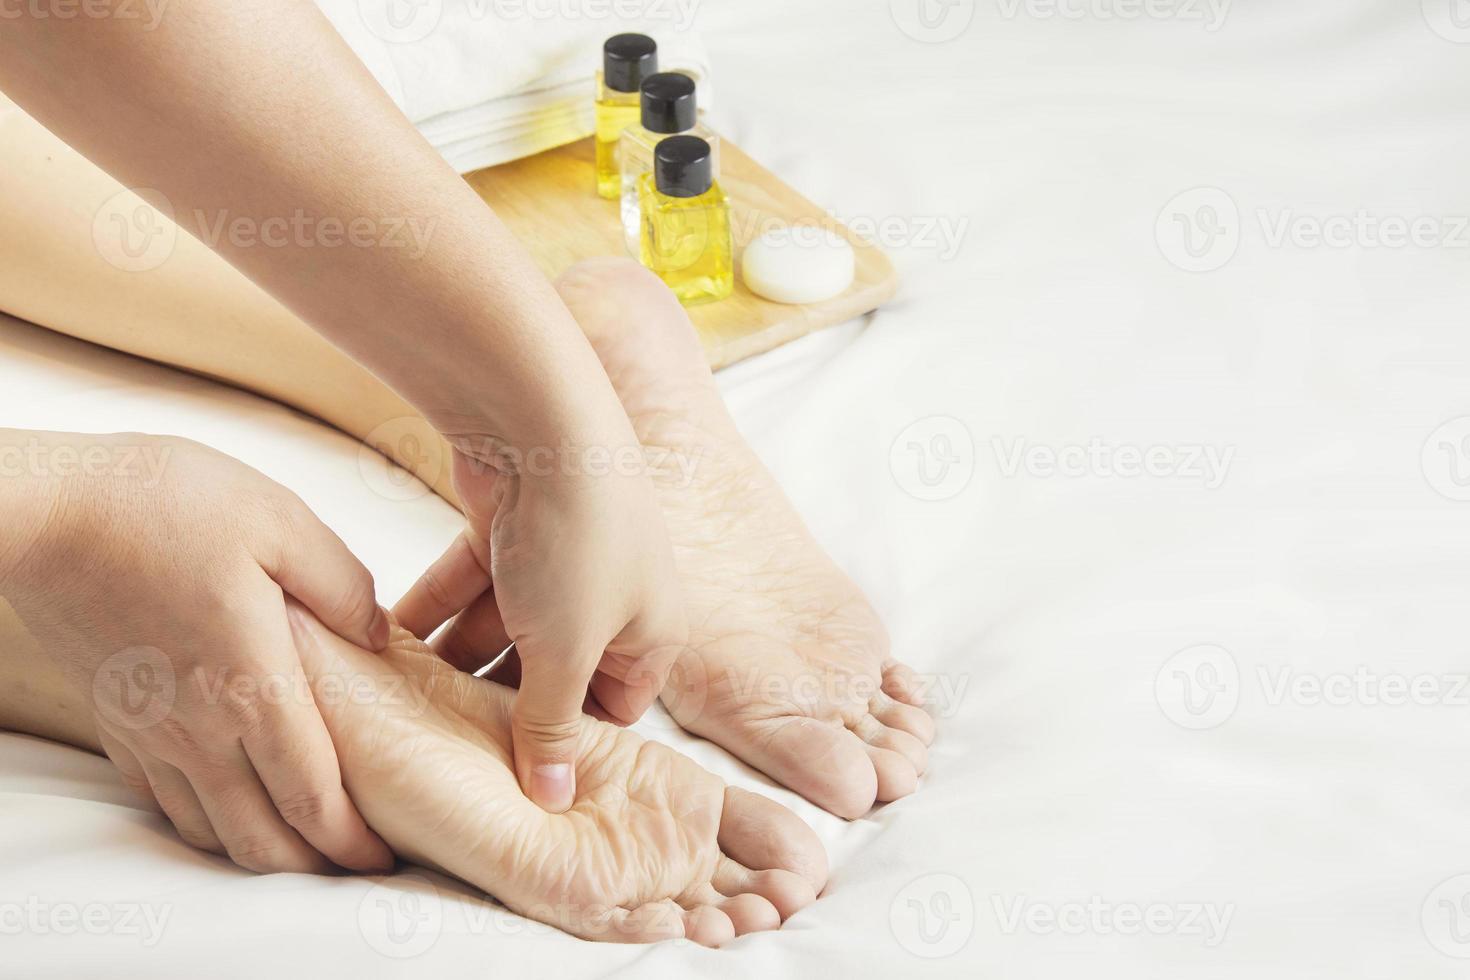 Hands of a professional foot massager with oils and health care products on white bed. Concept of health care, relaxation, foot spa treatment. or product introduction for women's foot spa photo